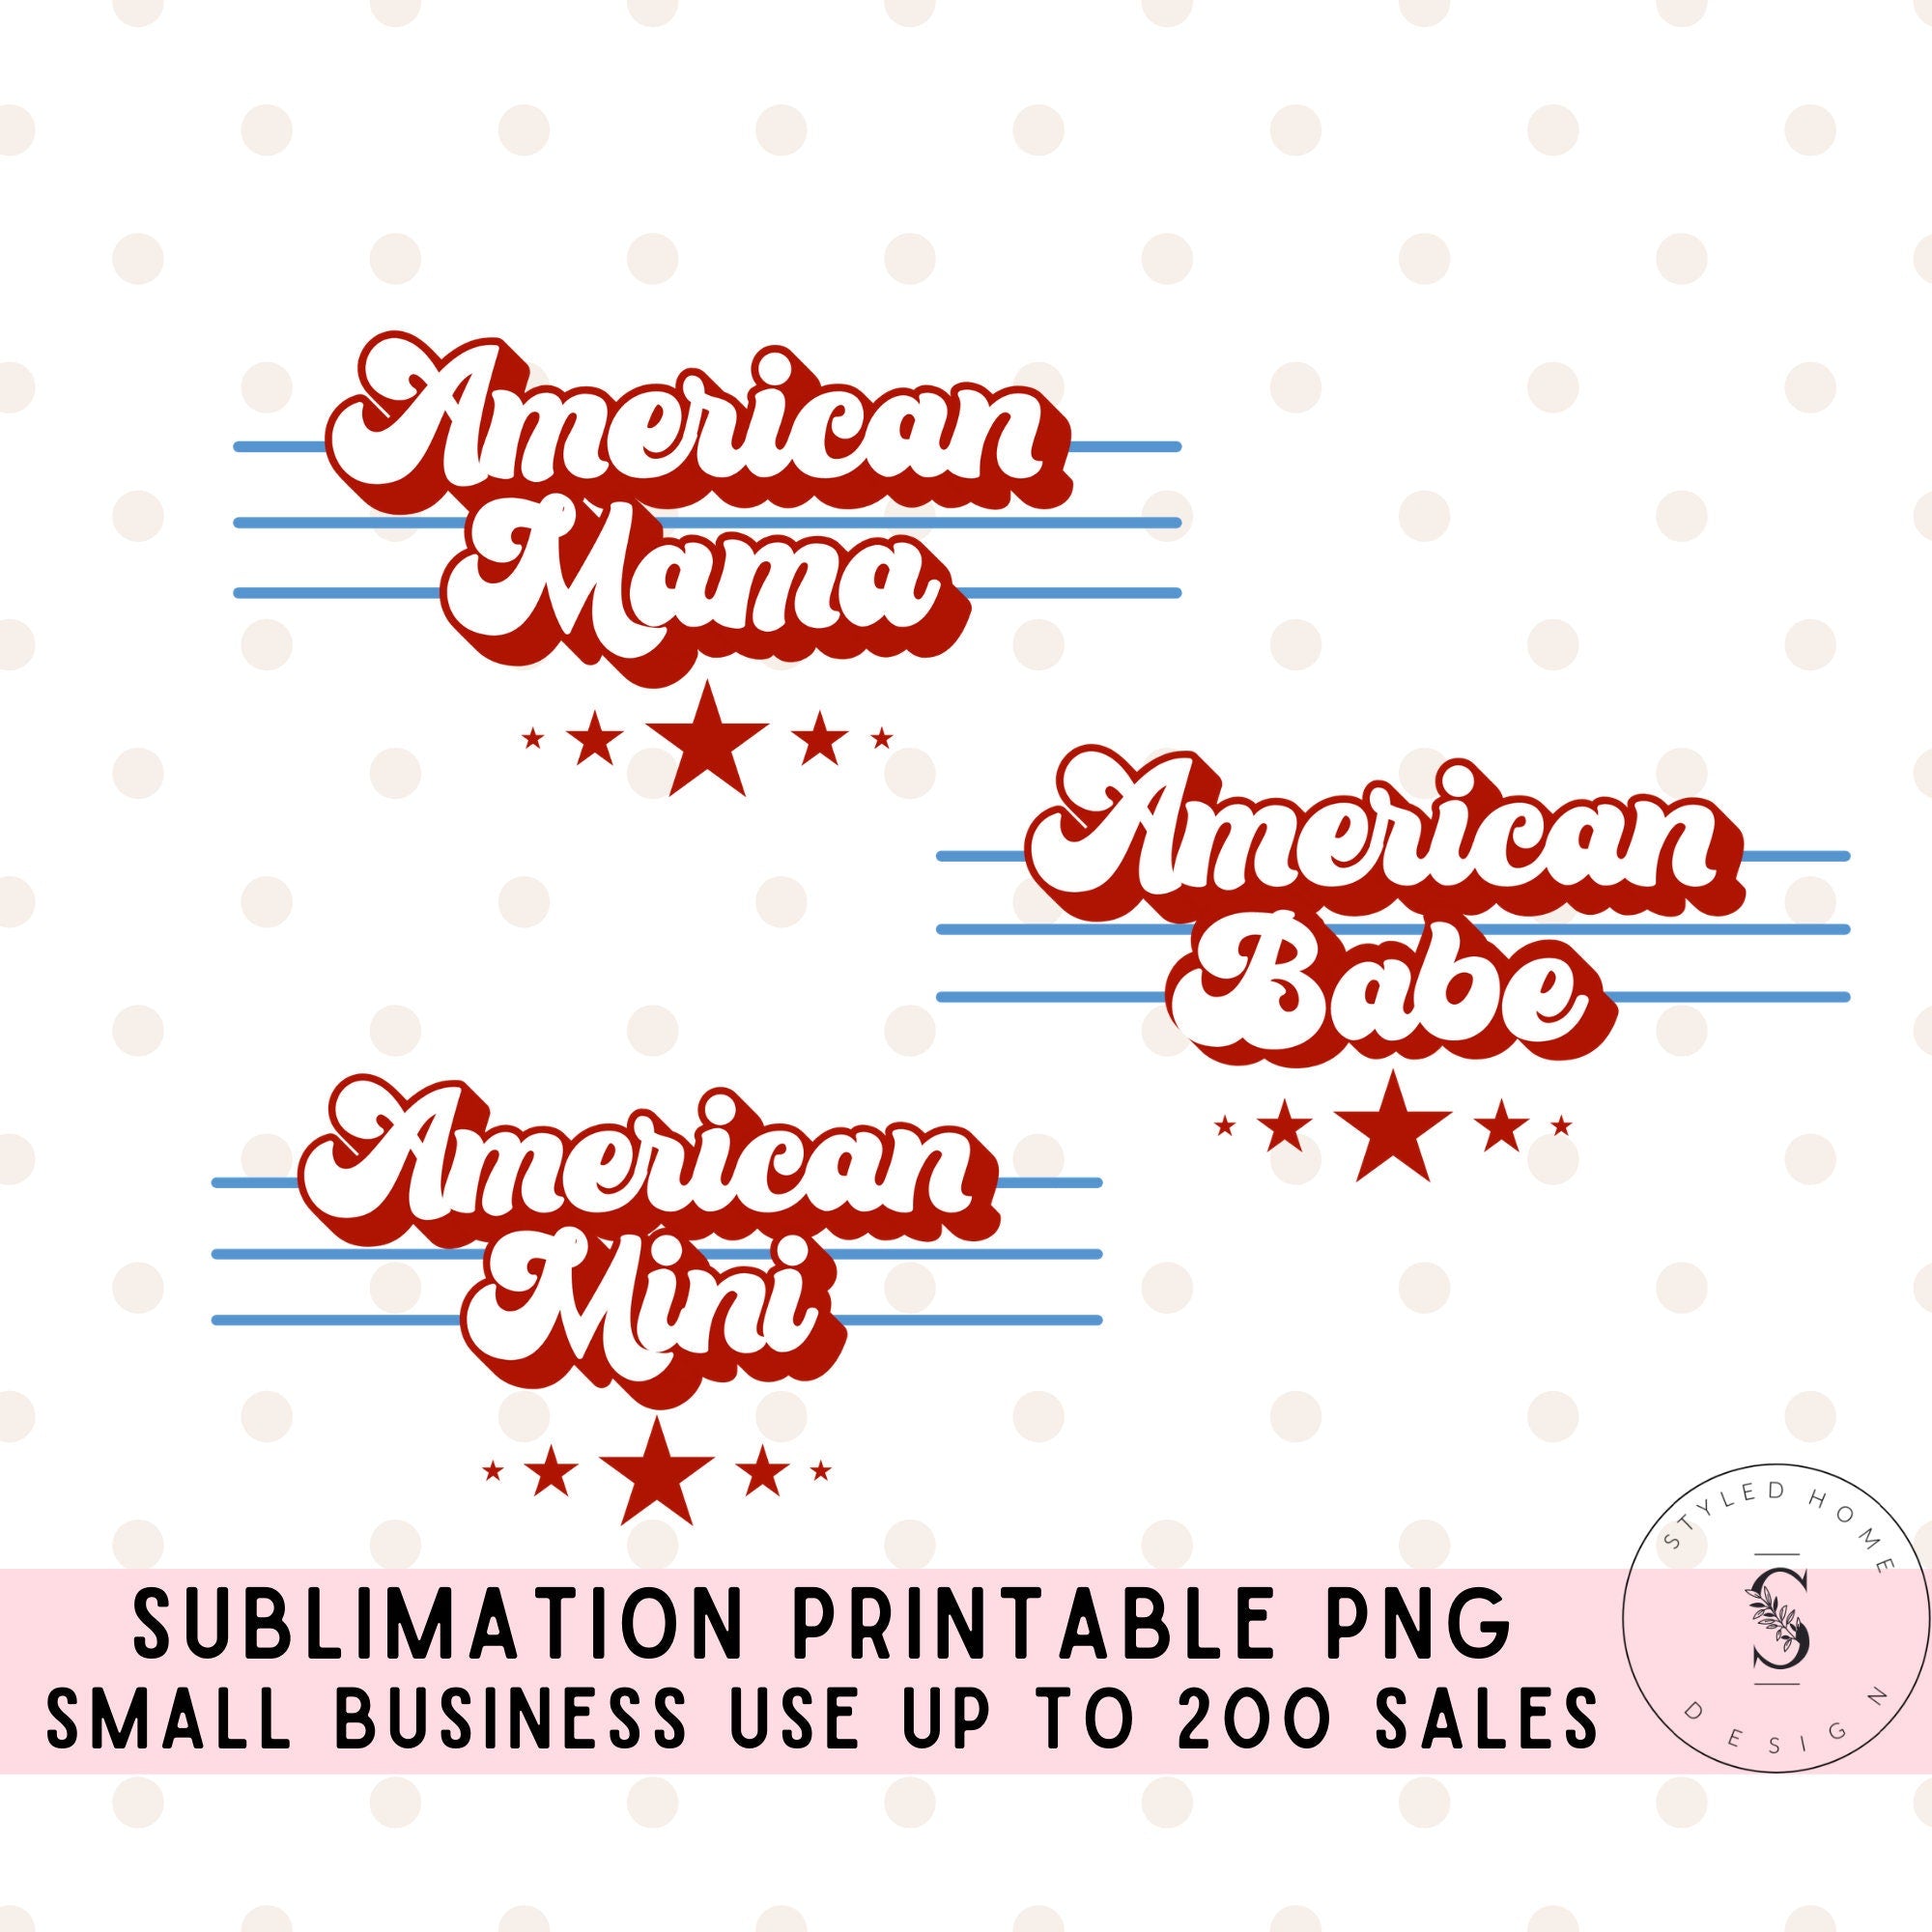 American, Usa, 4th of July, Fourth of July Retro Png, Sublimation T-Shirt Design, Boho, Summer, Printable PNG, Cricut, Sublimation